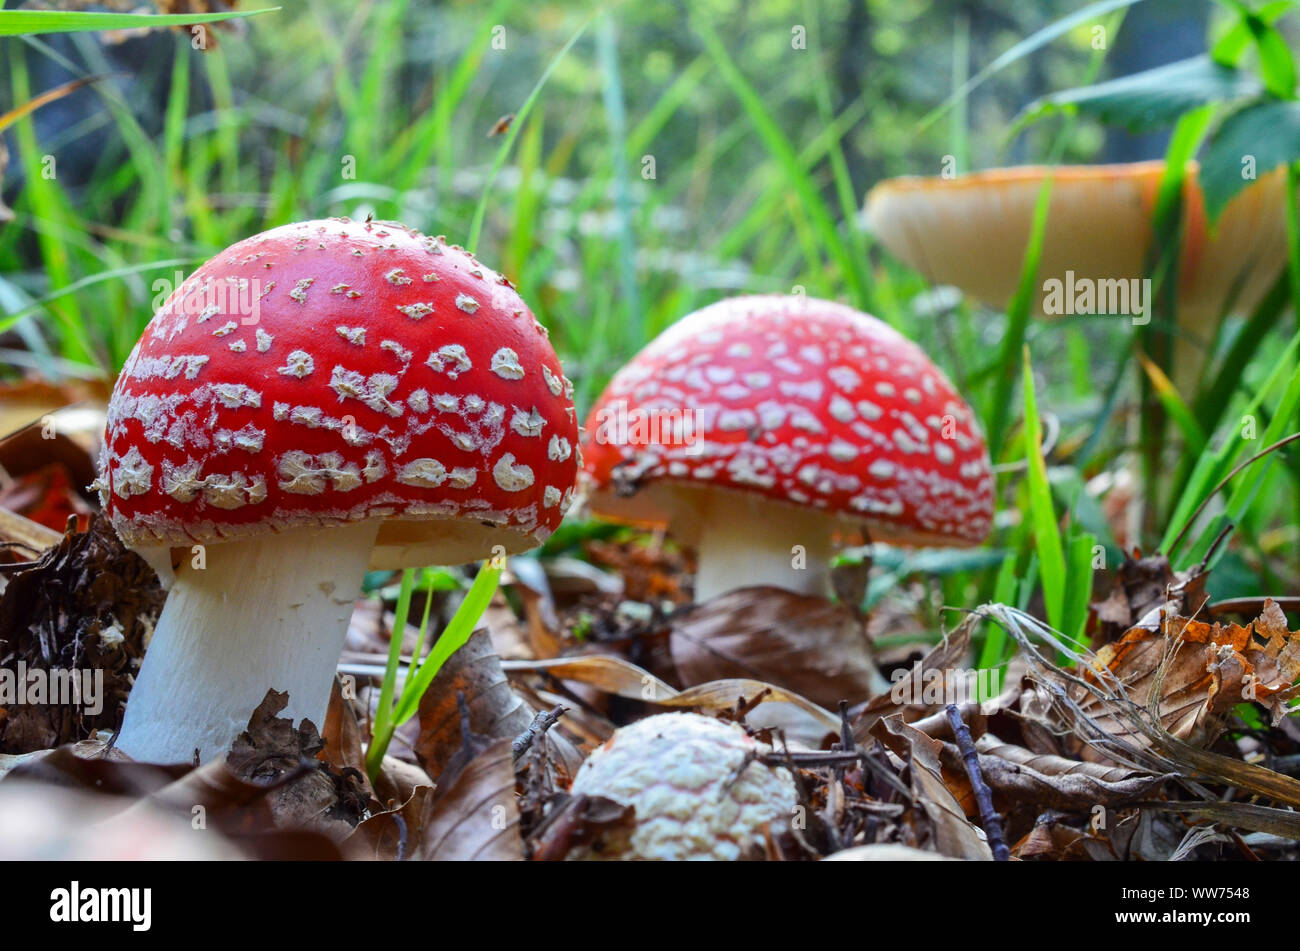 Three young, beautiful, but toxic Fly Agaric mushrooms (Amanita Muscaria), growing in a row in natural habitat Stock Photo